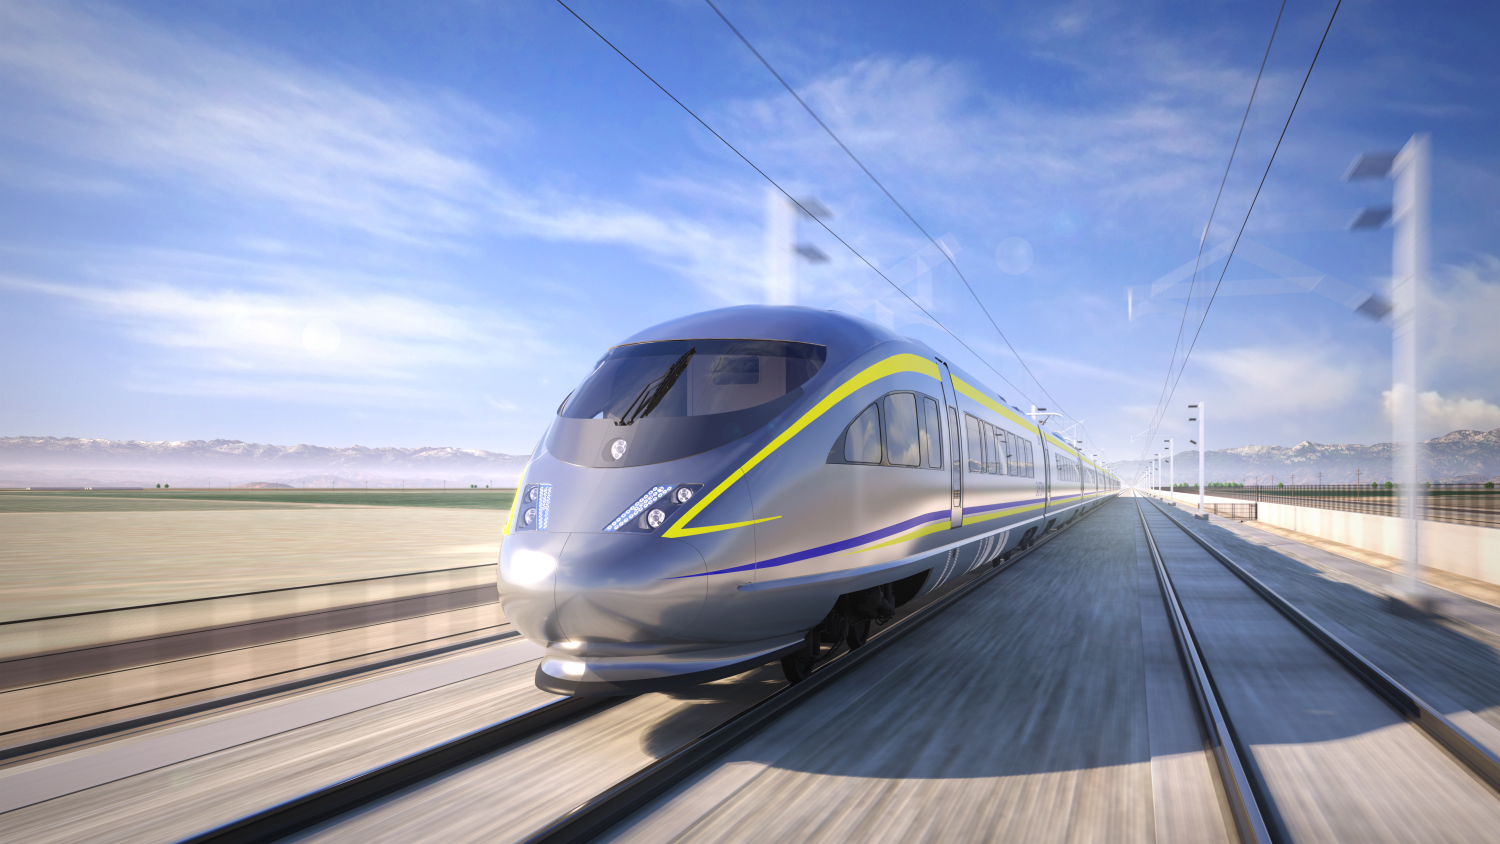 Democrats in California and D.C. clash over how state's high-speed rail should be powered